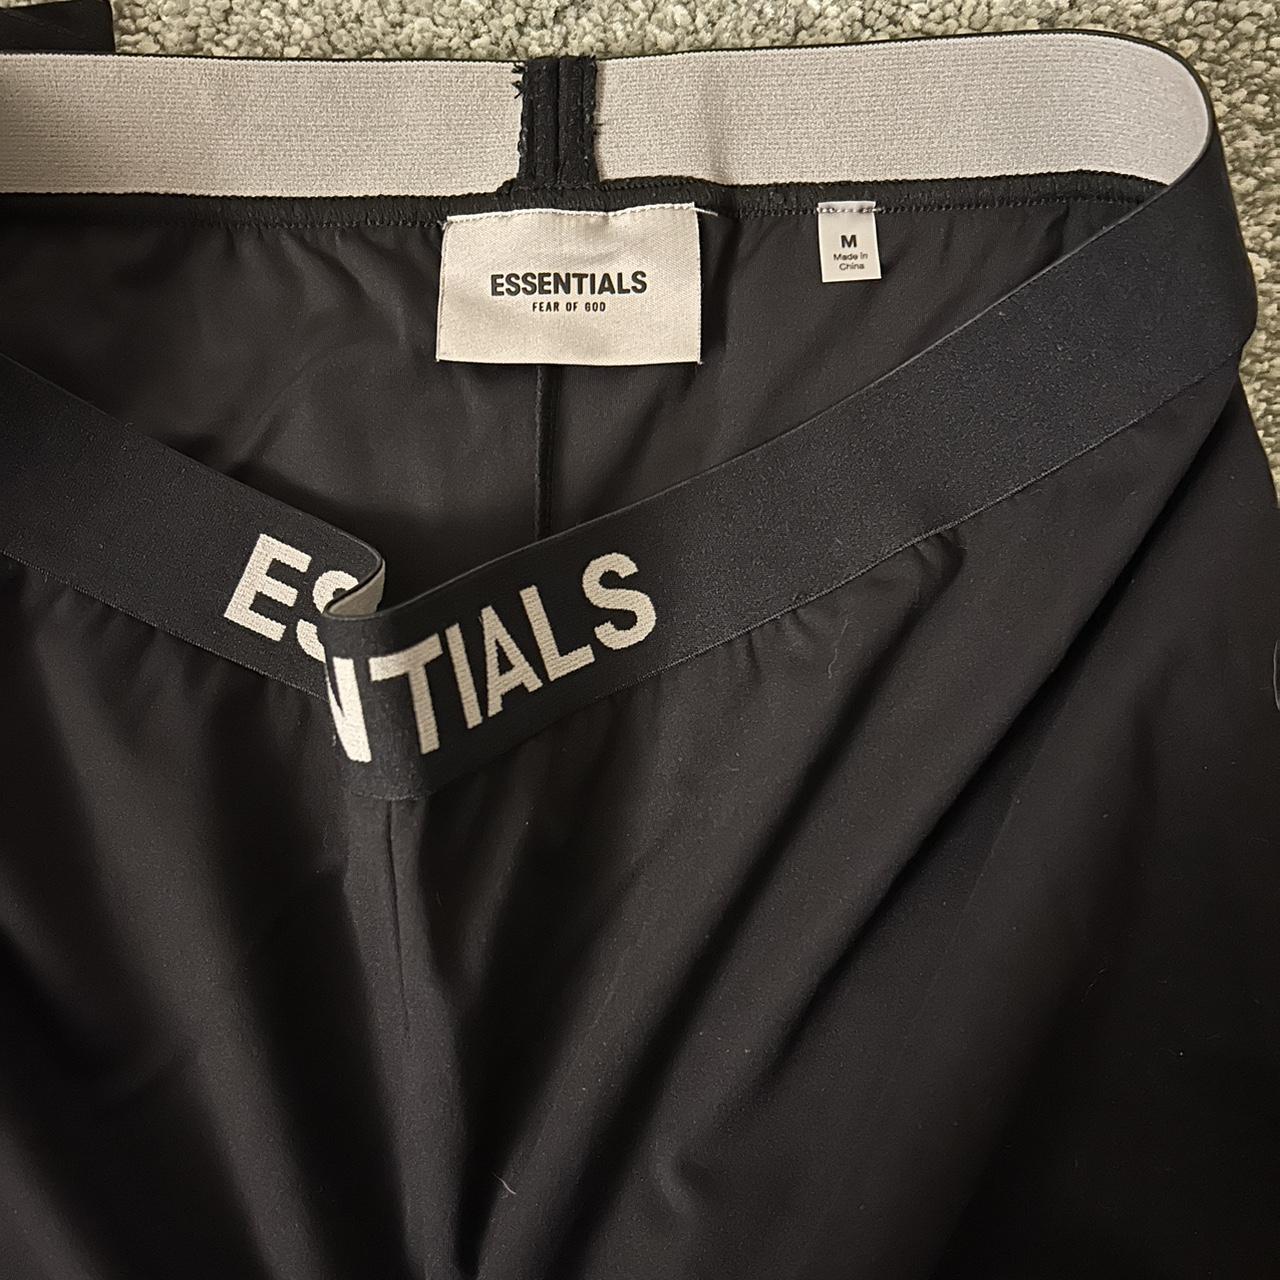 Authentic Fear of God Essentials tights. Never worn.